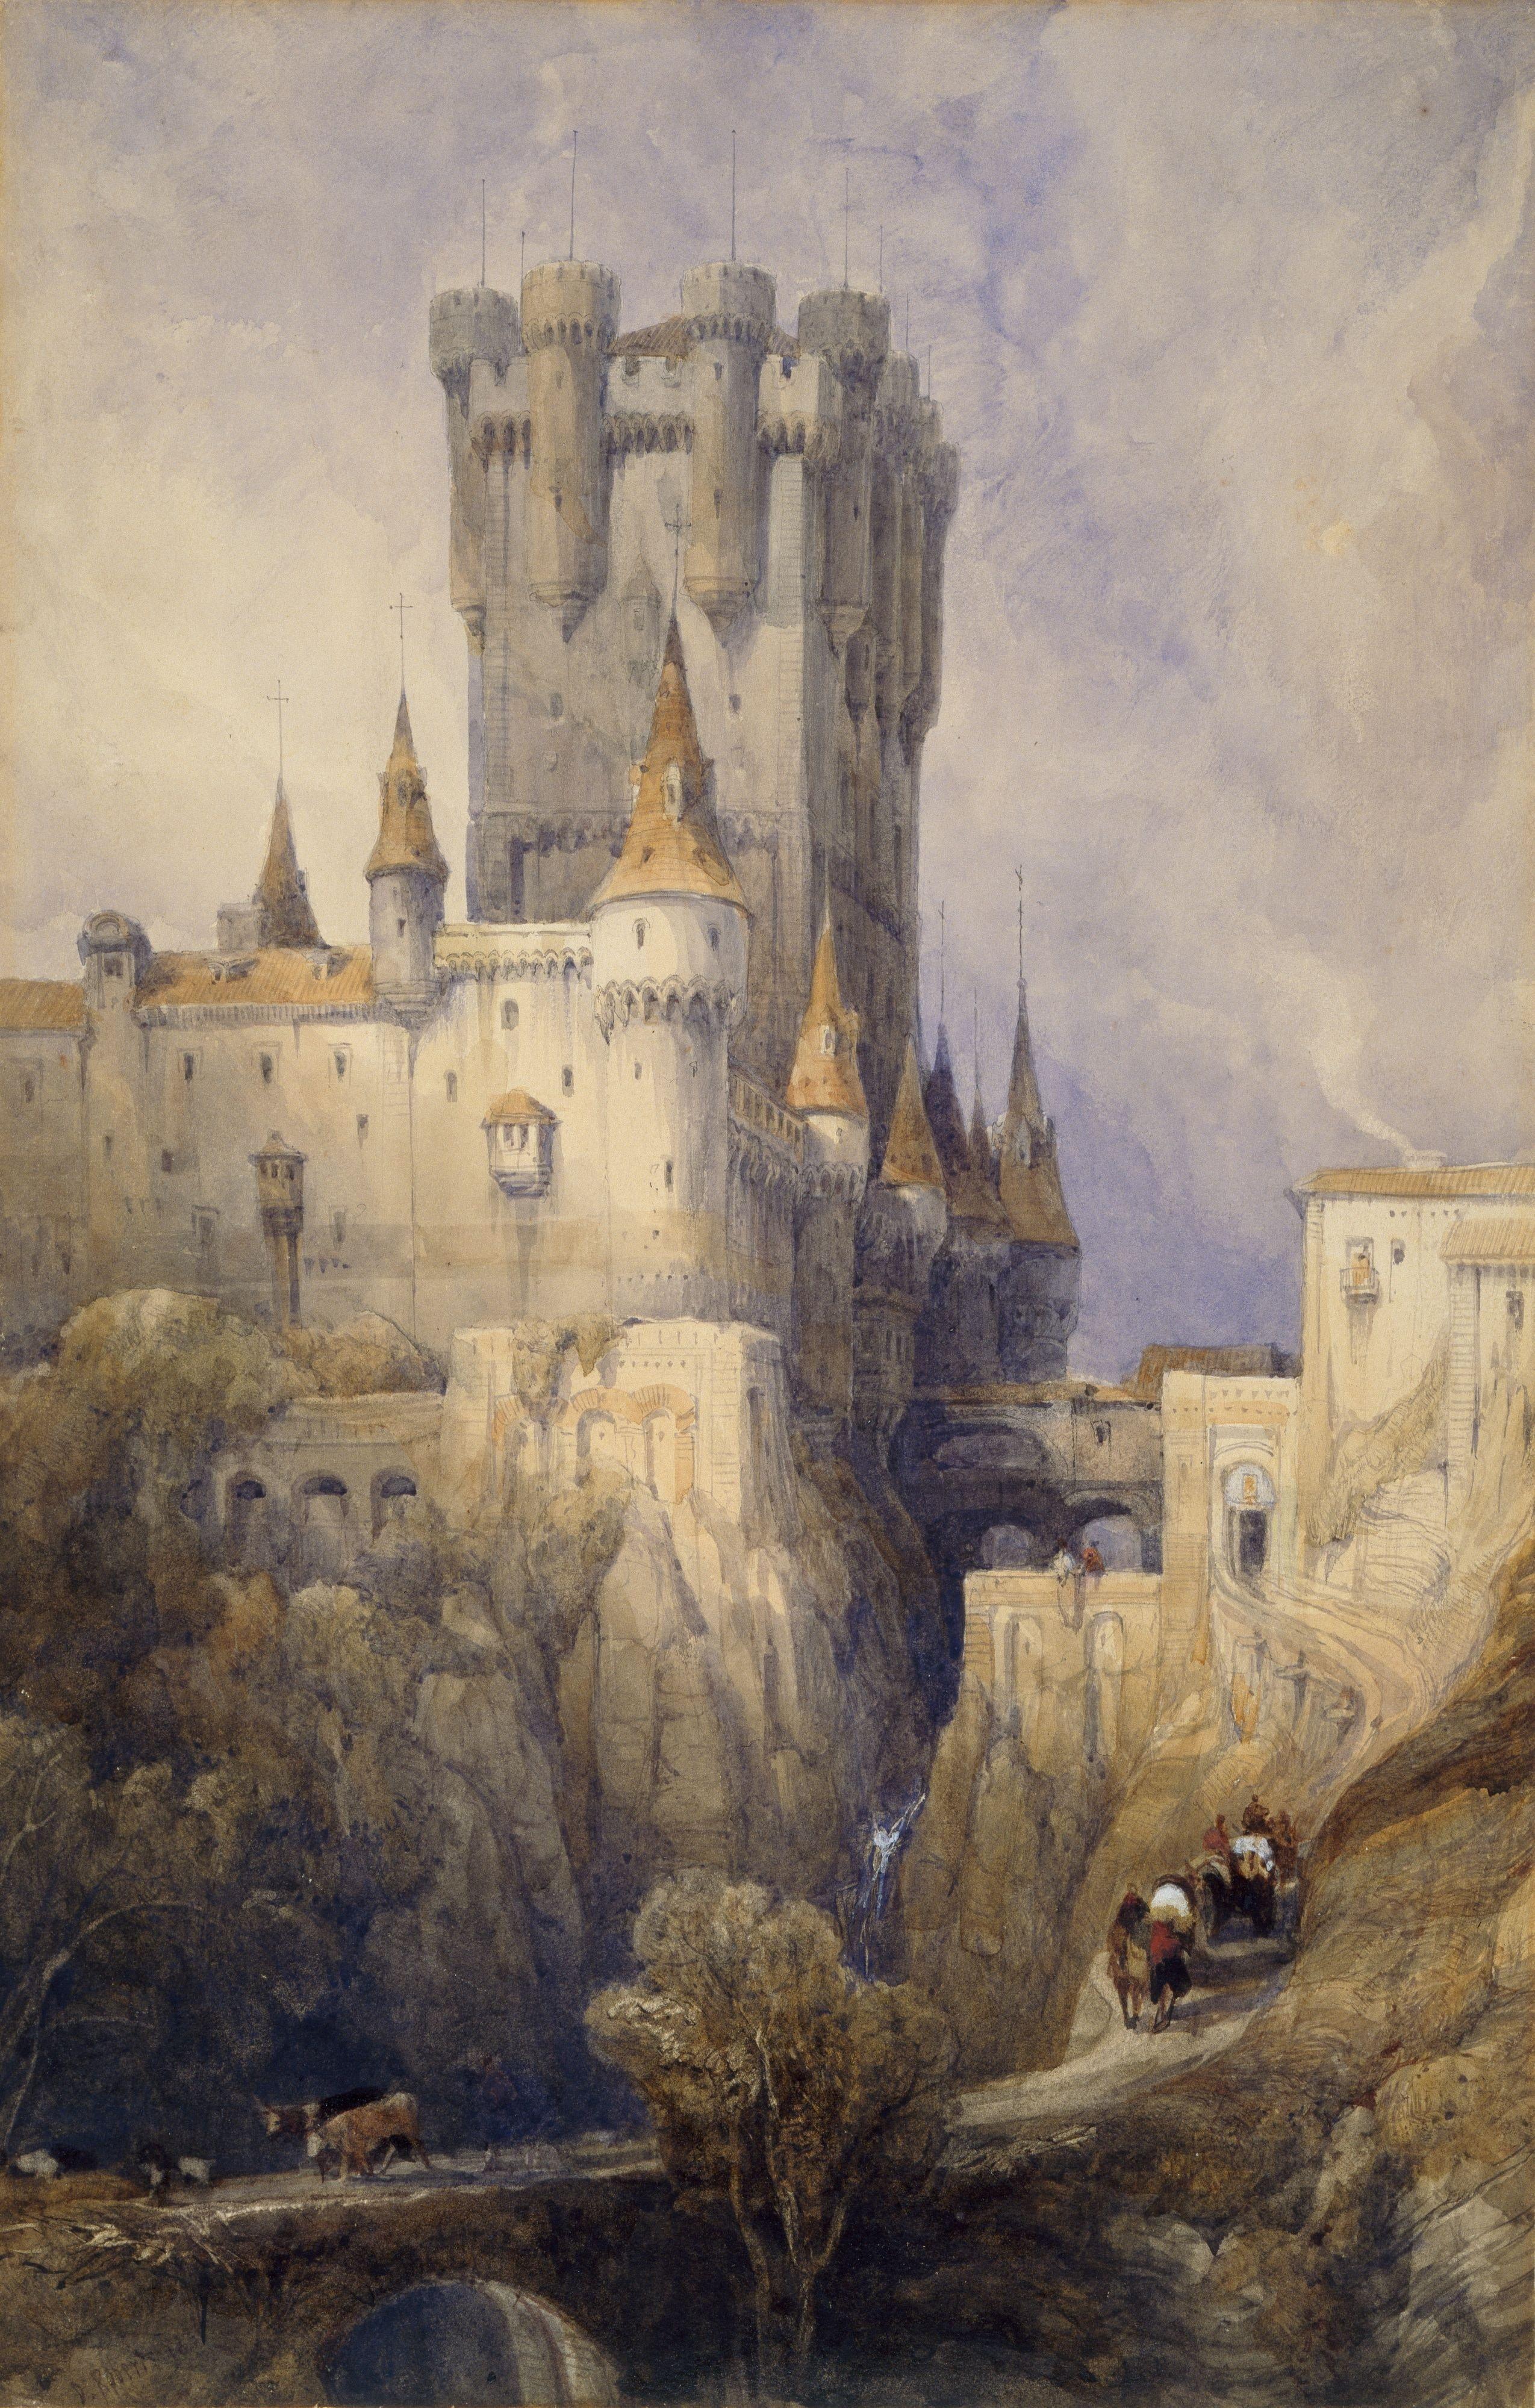 HD wallpaper, Artwork, Architecture, Watercolor, Medieval, Painting, Castle